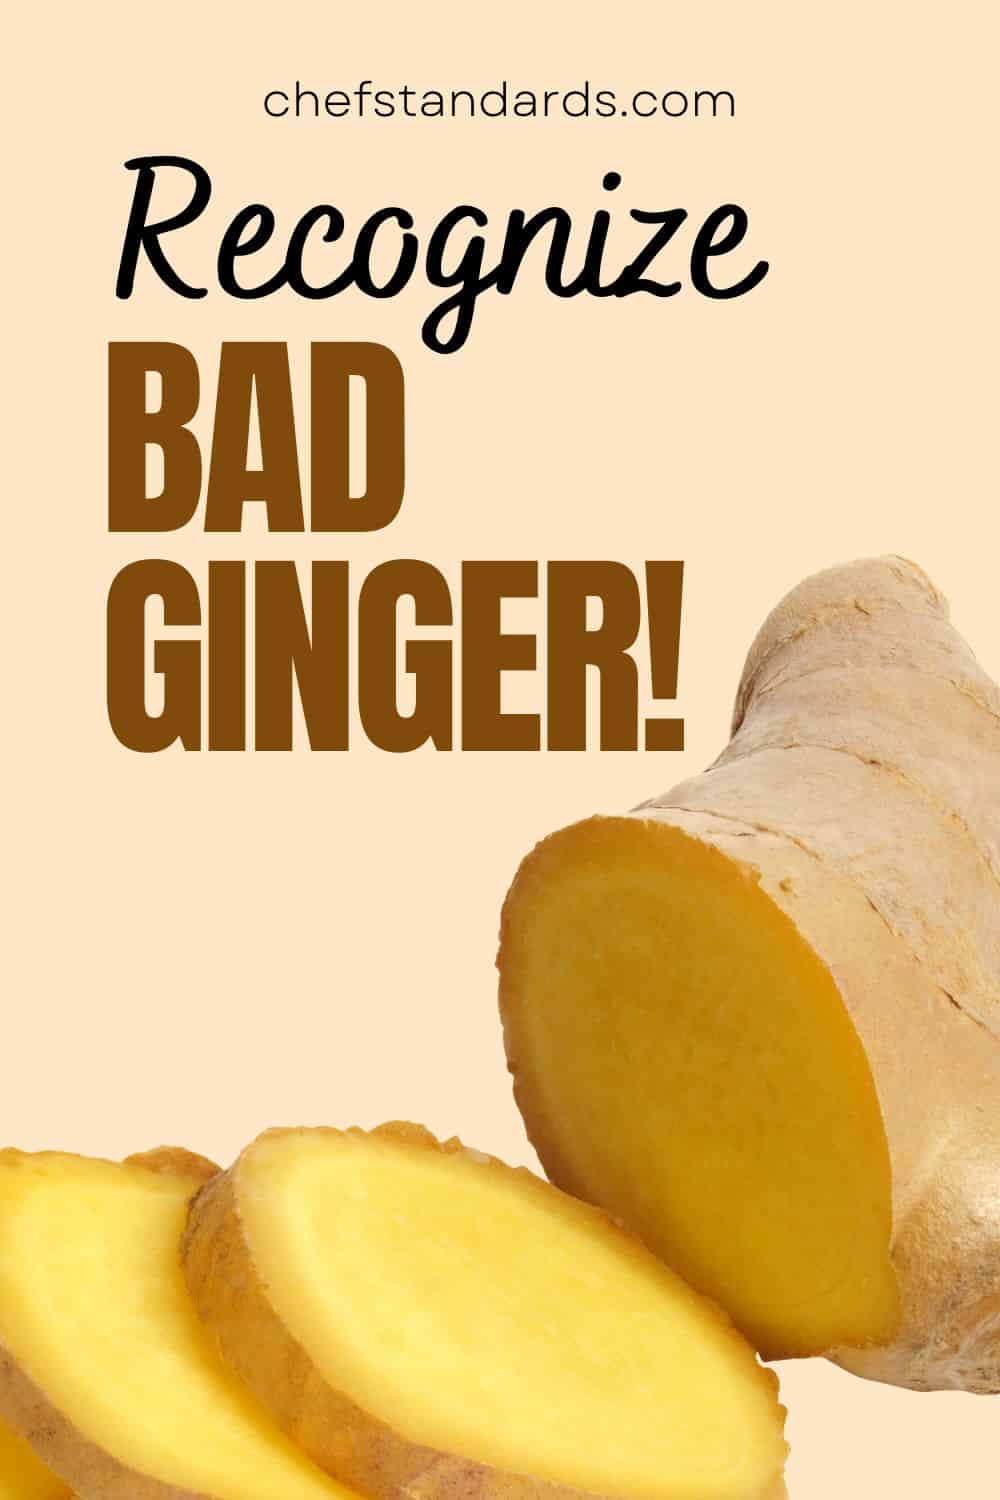 5 Signs Your Ginger Went Bad And Isn't Usable Anymore
